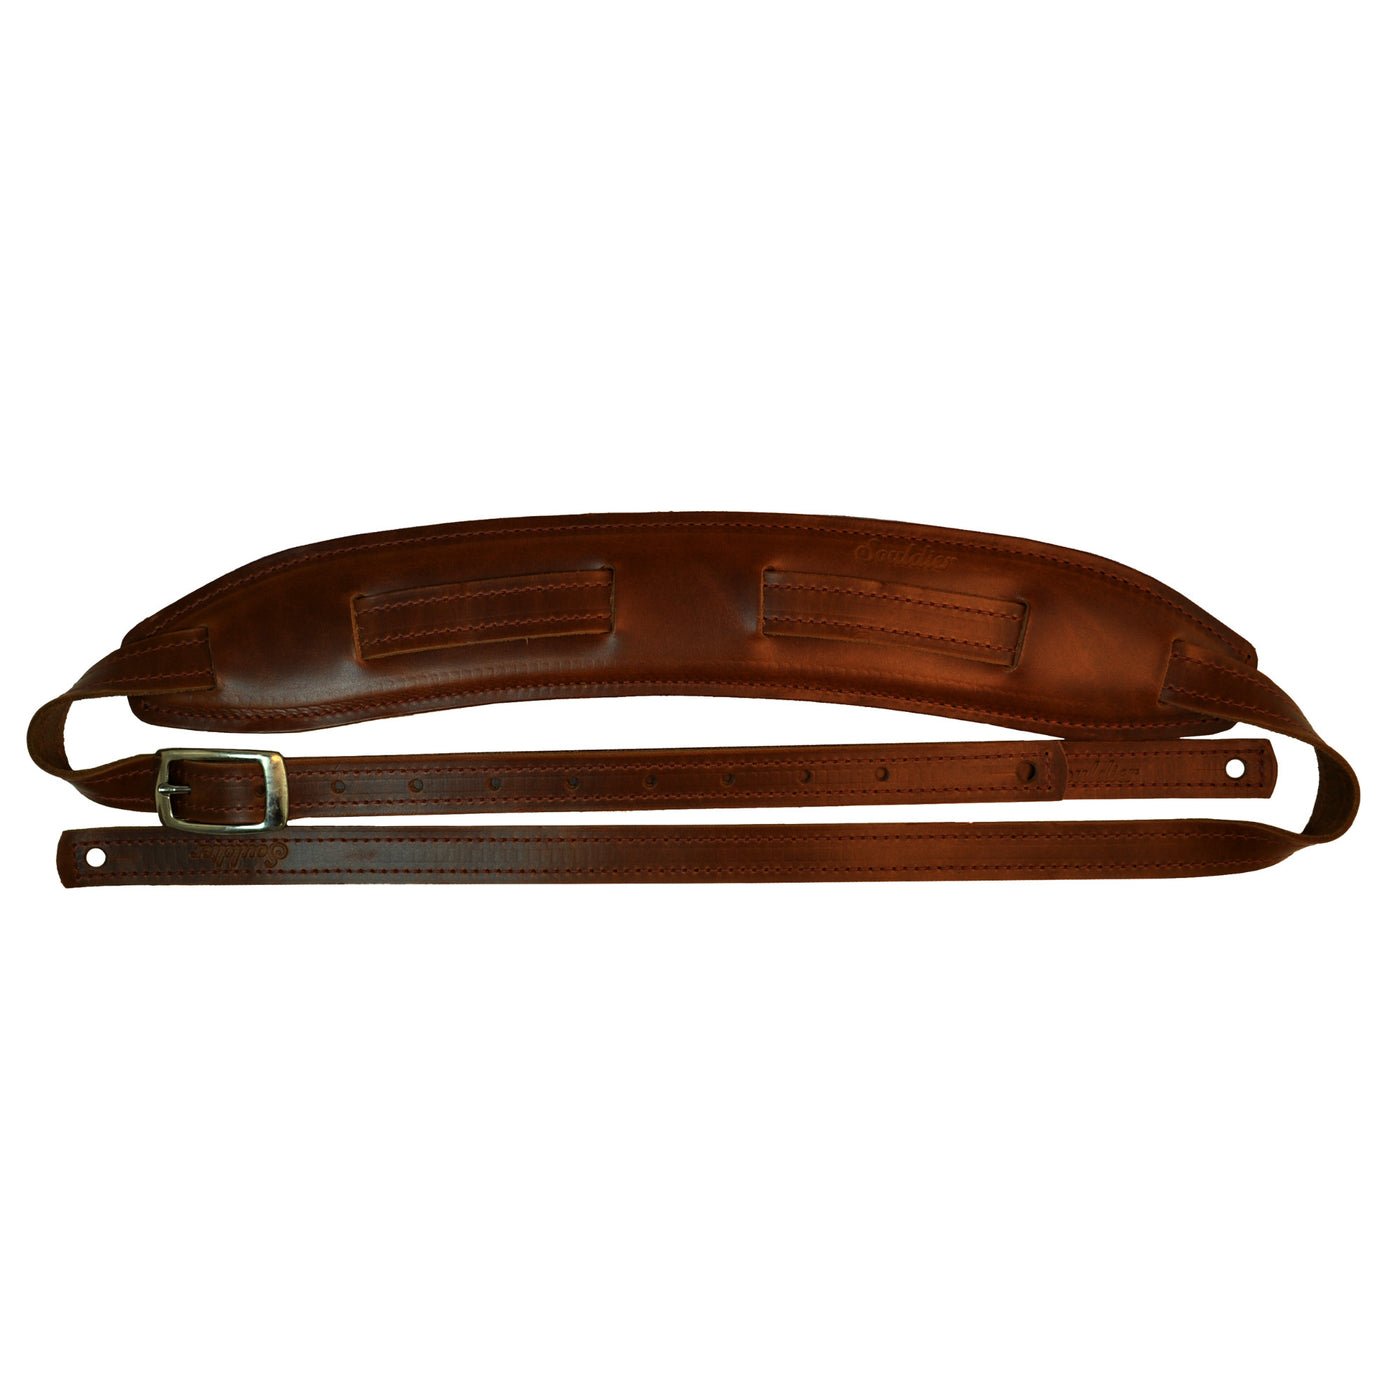 Souldier SSD0000BR02BR - Handmade Souldier Plain Saddle Strap for Bass Electric, or Acoustic Guitar, 2.5 Inches Wide and Adjustable up to 57" made in the USA, Brown